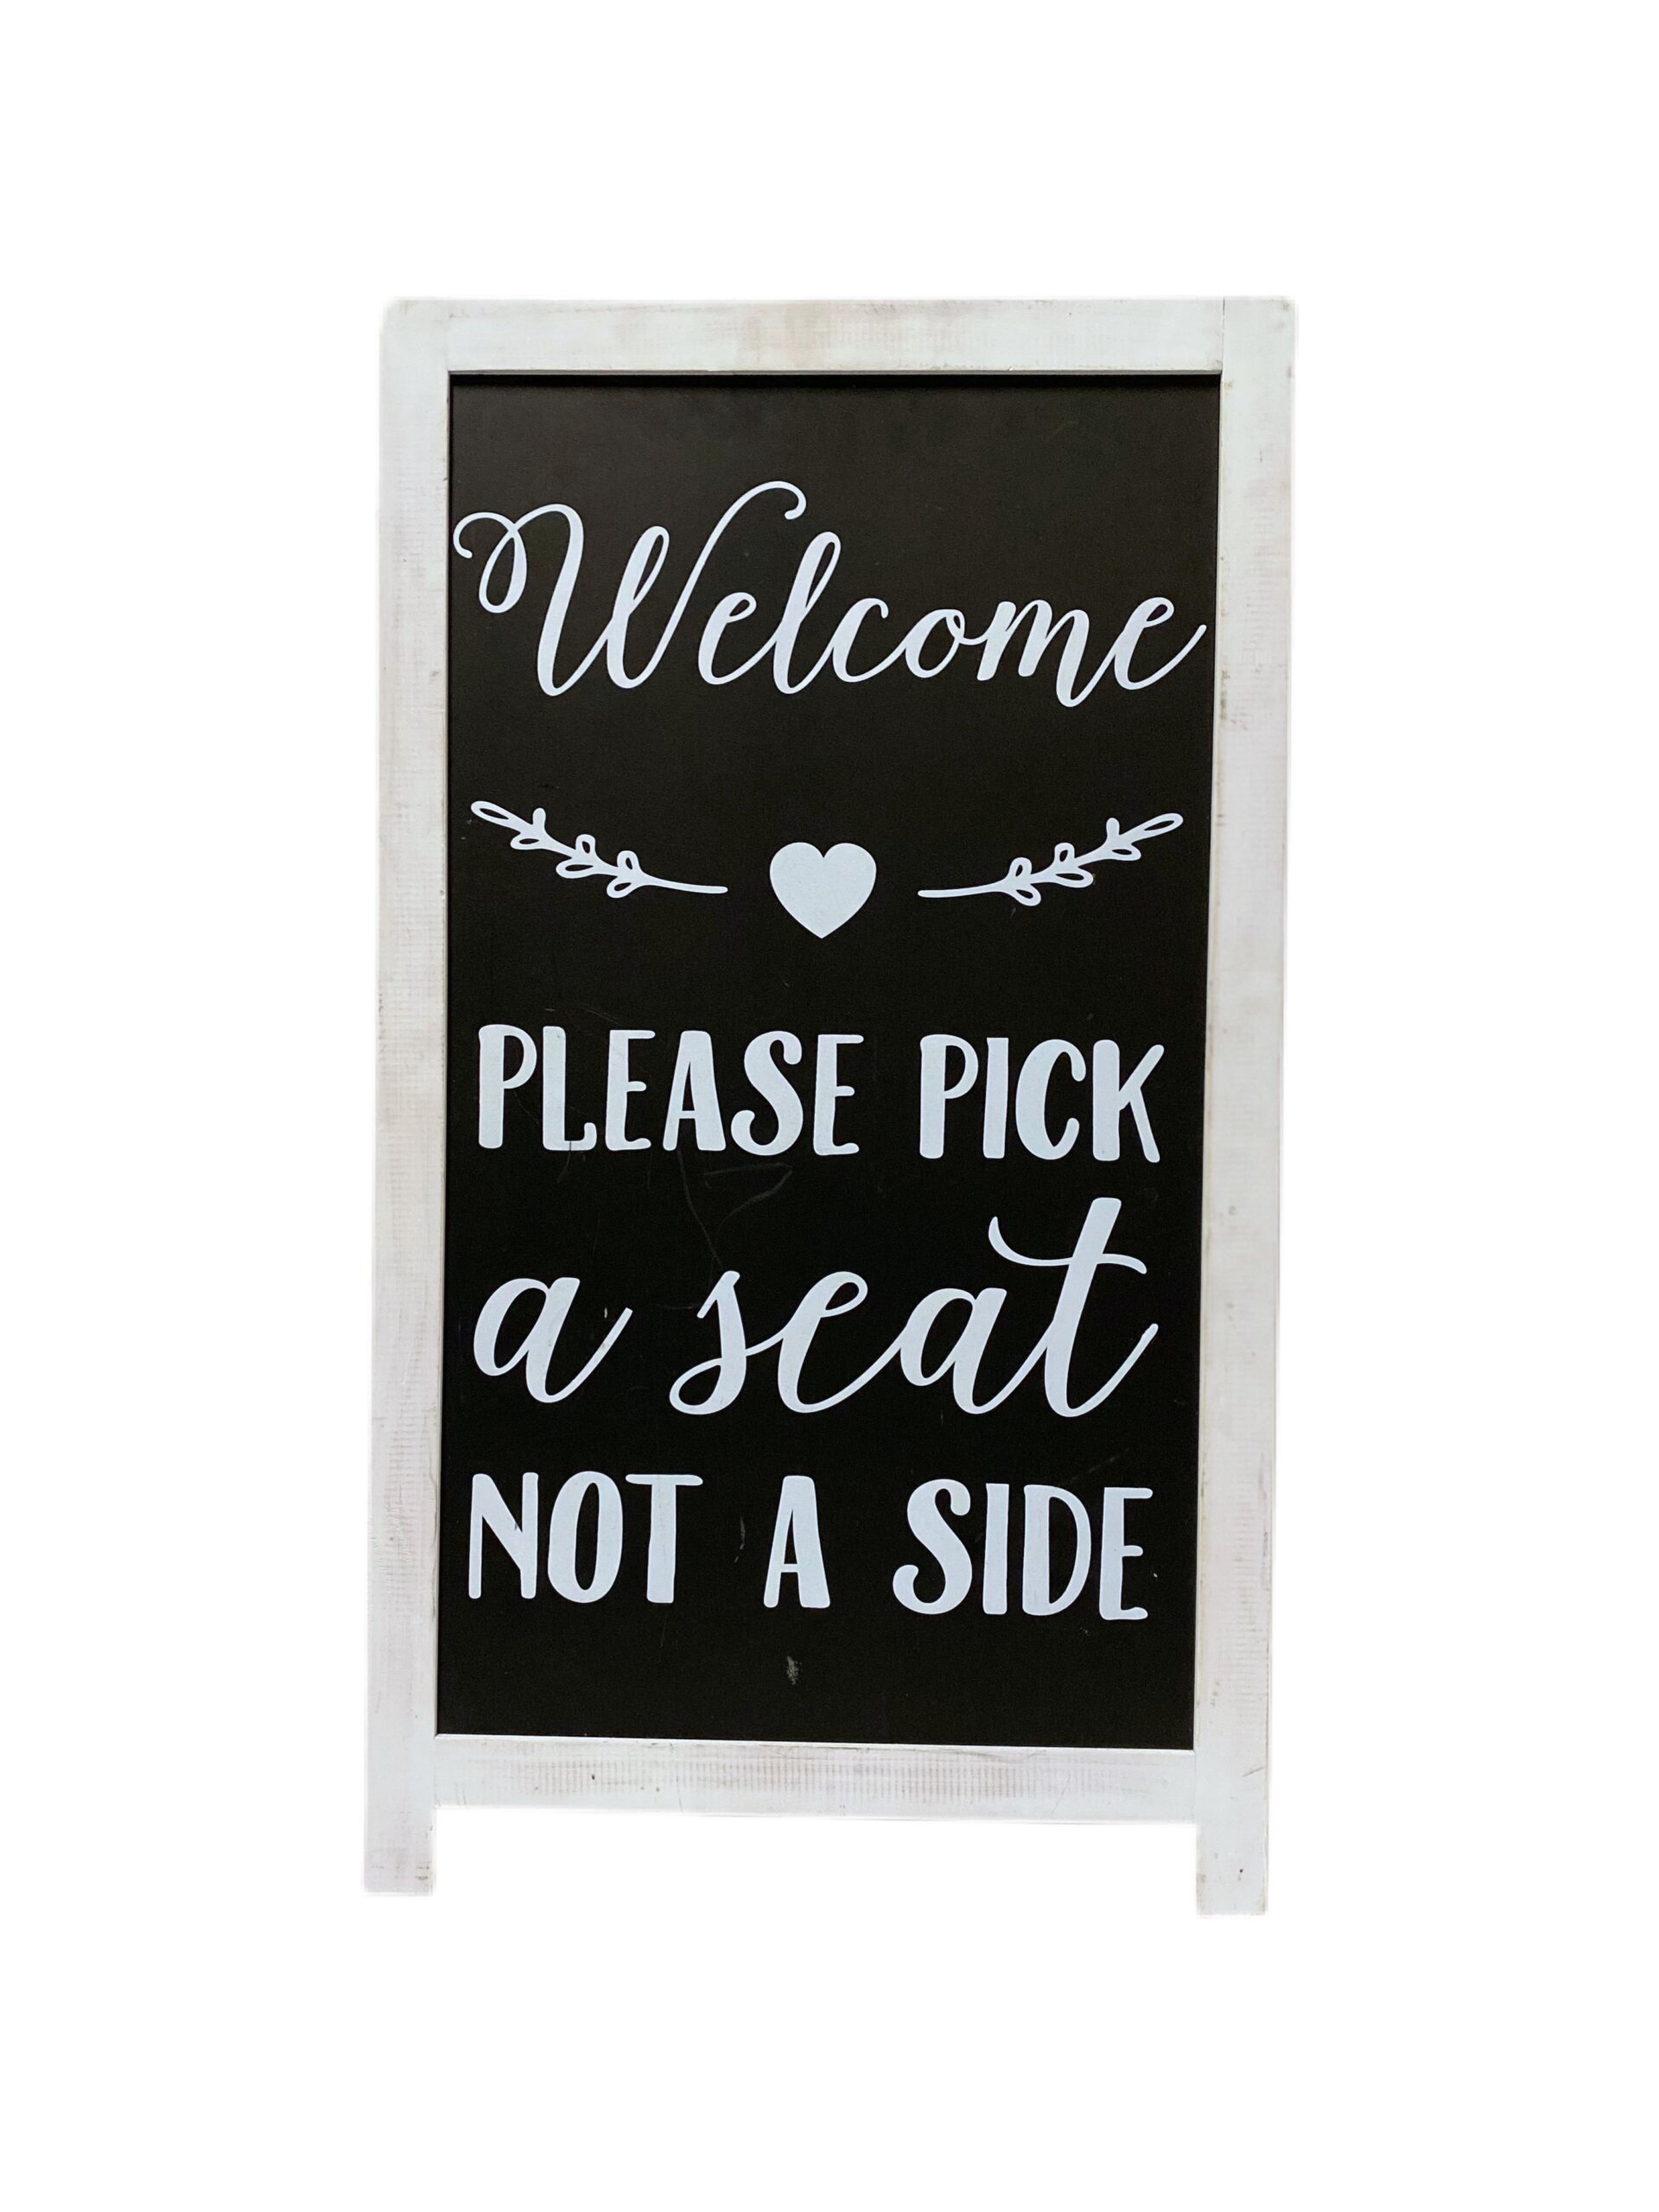 Wedding sign pick a seat not a side Pick a seat wedding